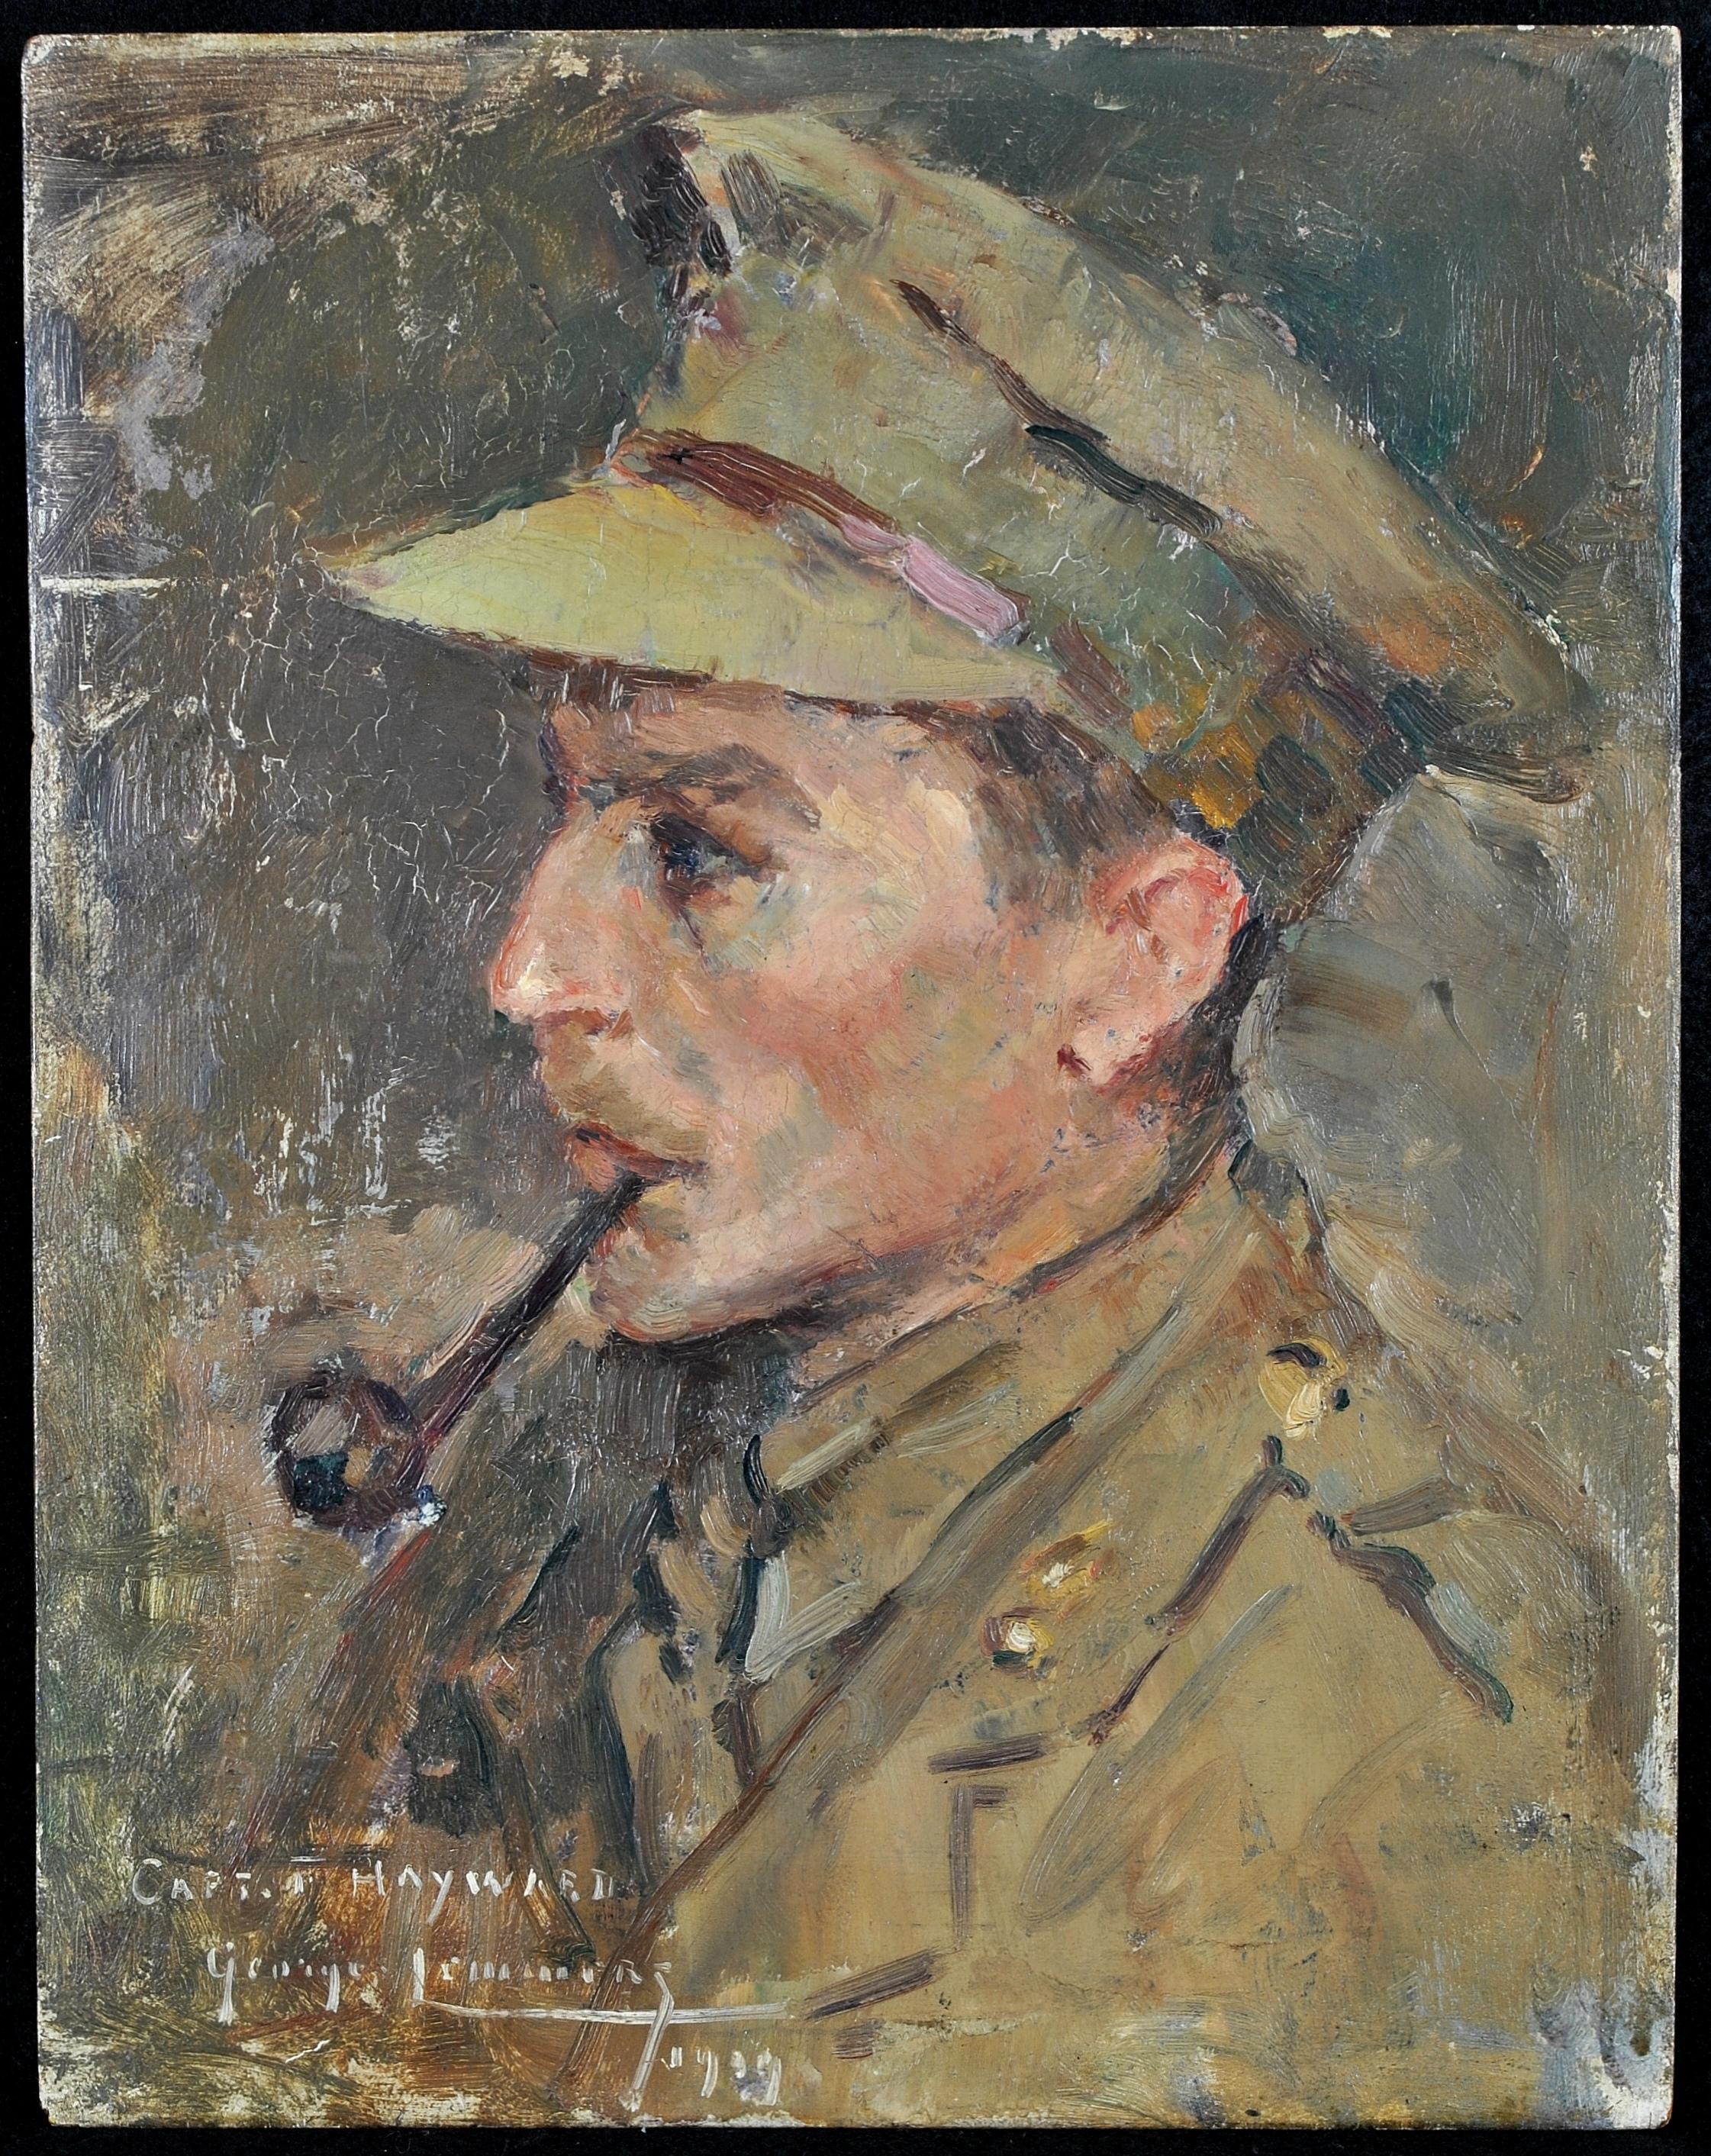 Fine signed and dated 1909 oil on mahogany panel portrait of ''Captain Hayward'' by Belgian artist Georges Lemmers. Superb quality rendering of the dashing young officer smoking a pipe in full officer uniform. Inscribed, signed and dated lower